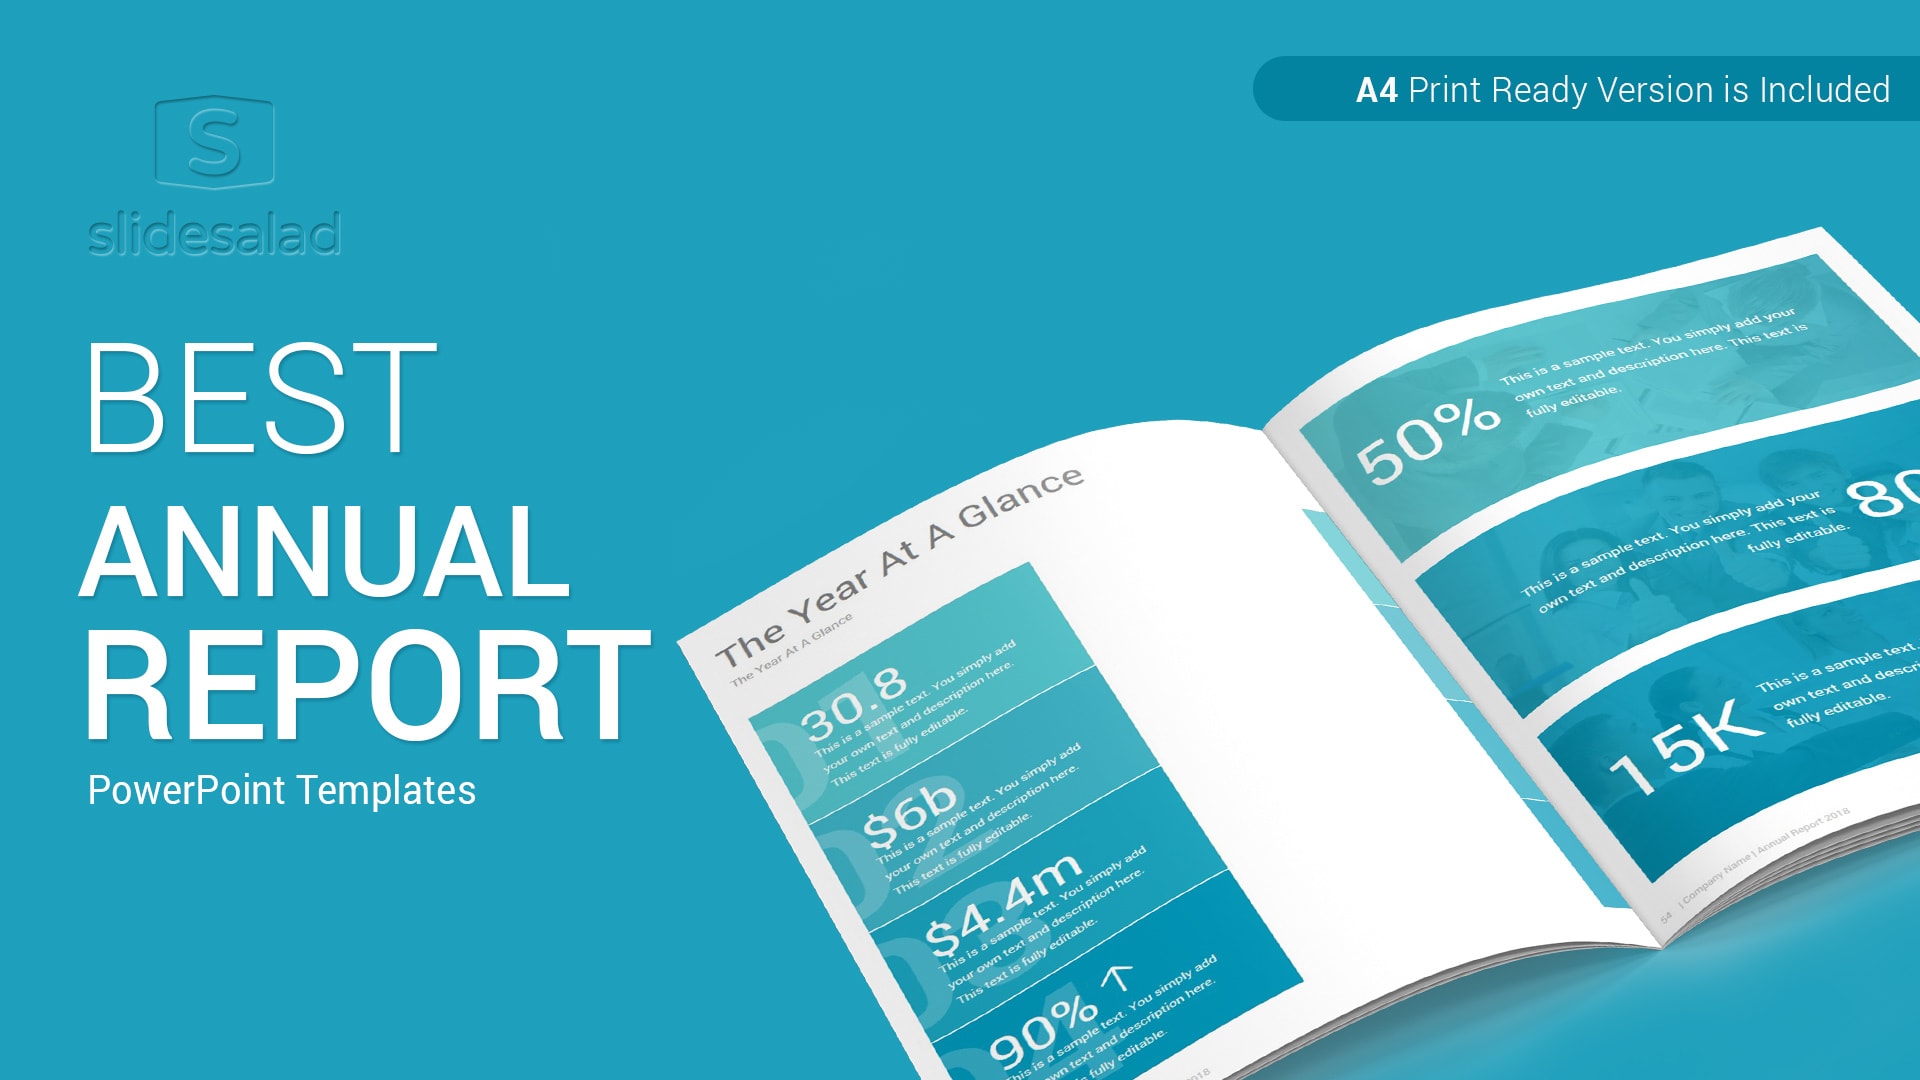 Best Annual Report PowerPoint Templates 1